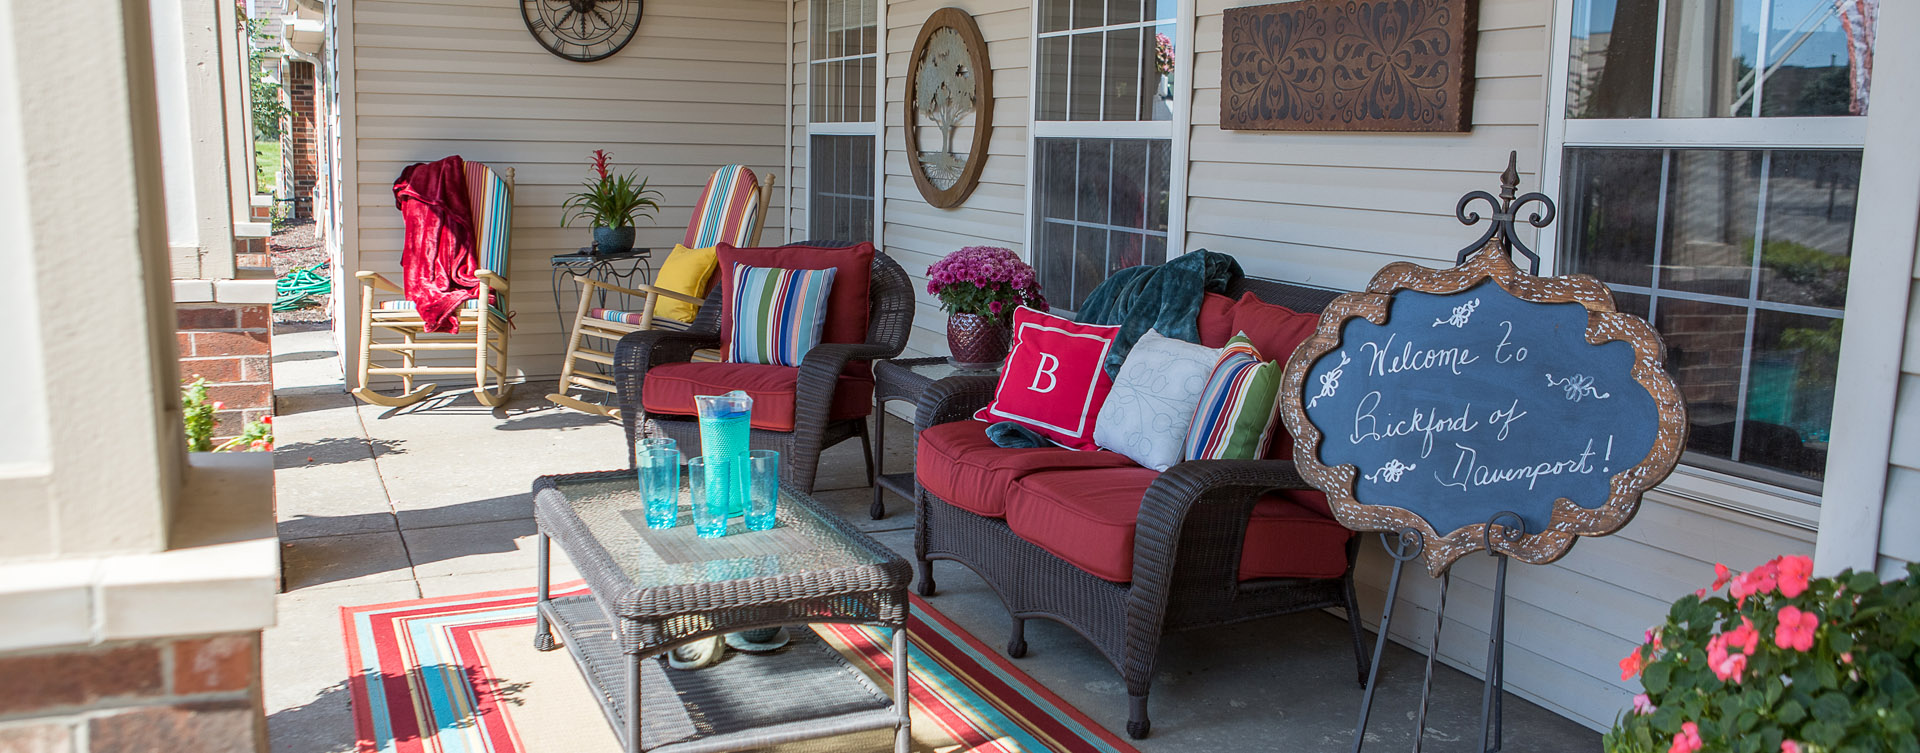 Enjoy conversations with friends on the porch at Bickford of Davenport